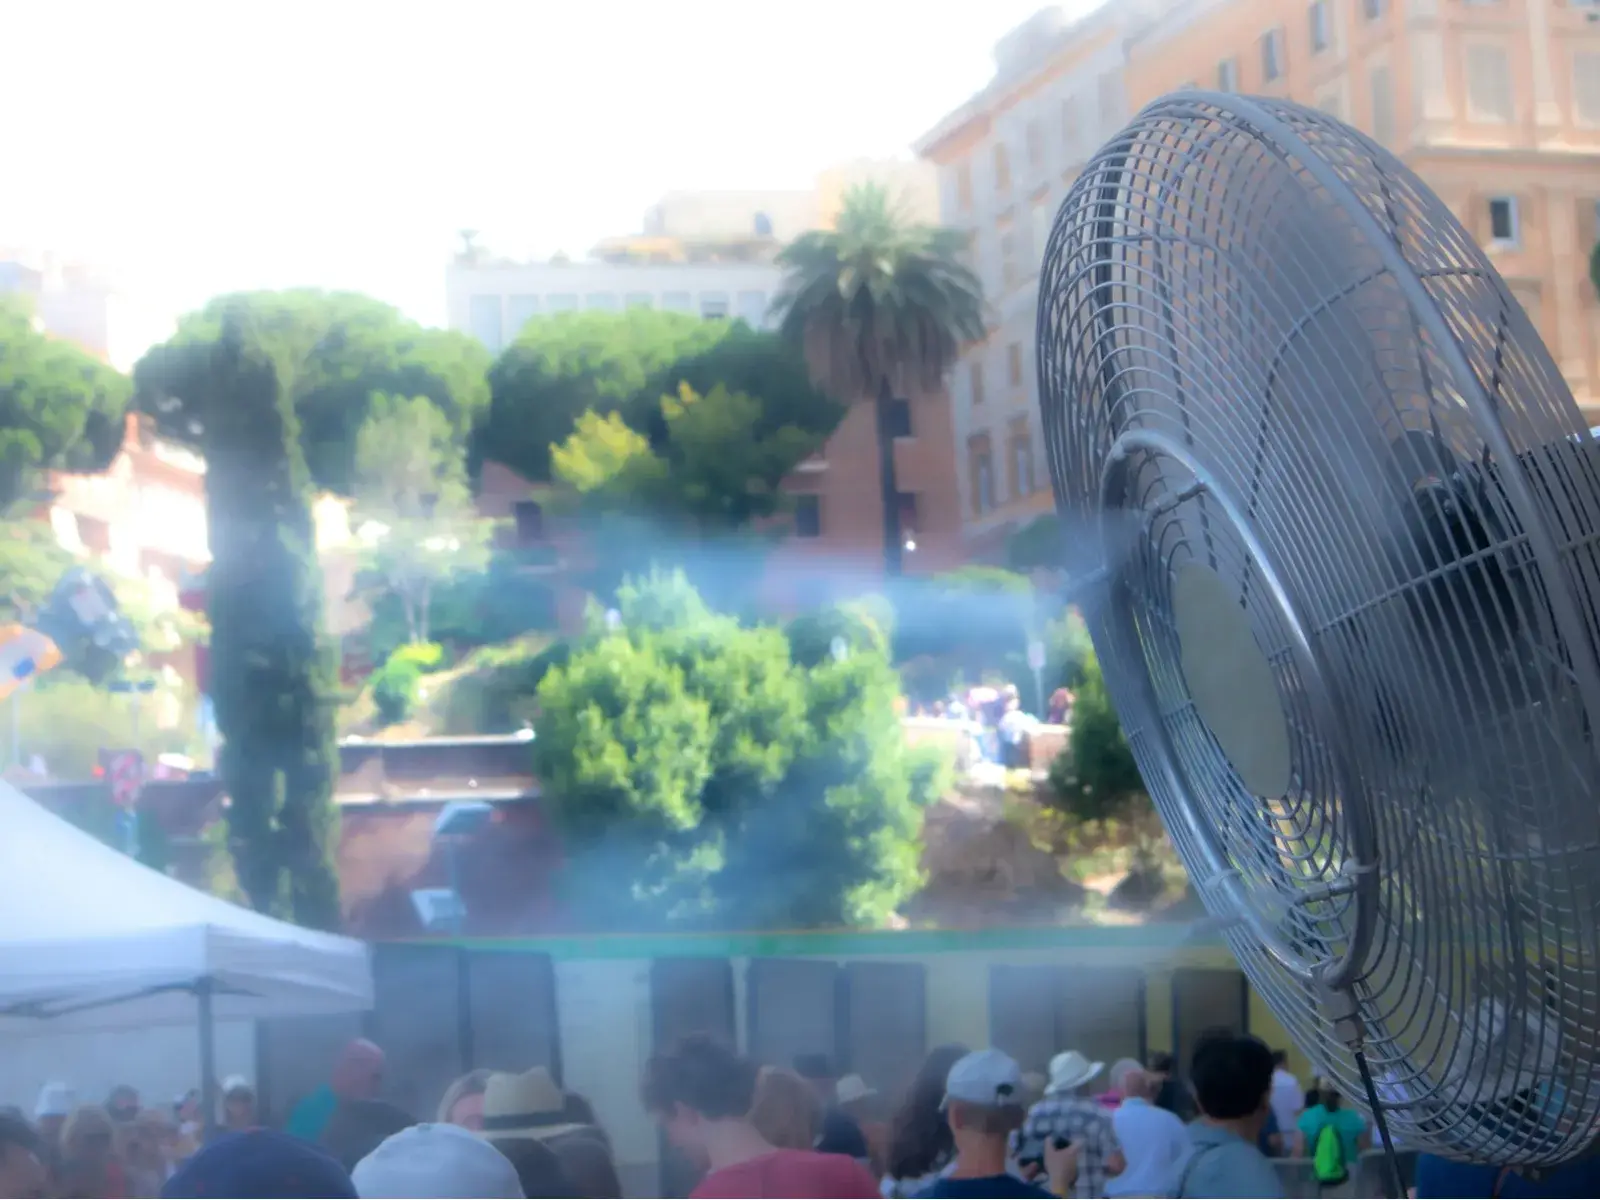 A misting fan pictured on a hot day during the worst time to visit Rome